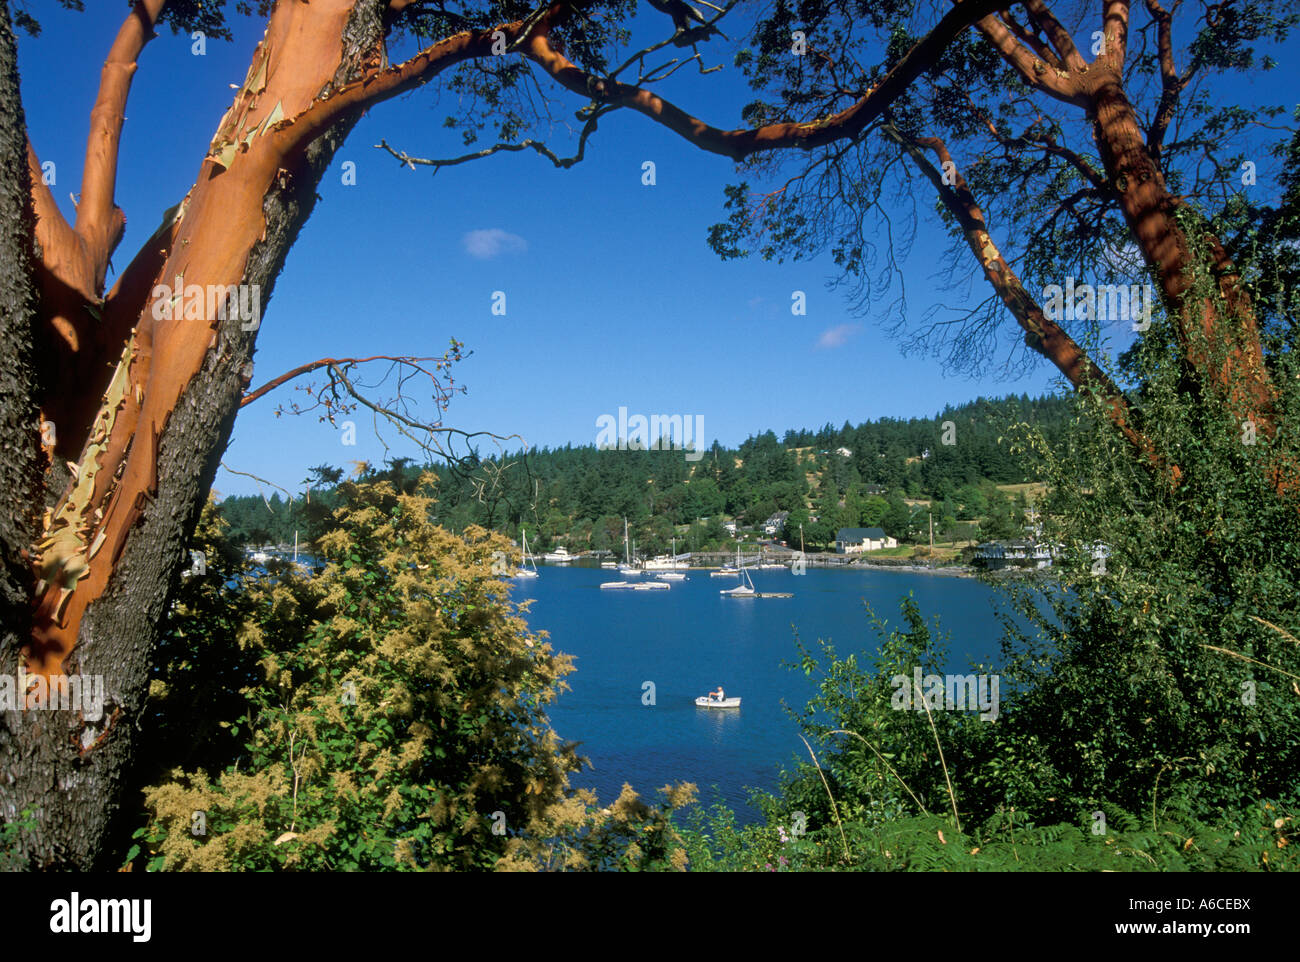 Boats and bay framed by Madrone trees at Westsound Orcas Island San Juan Islands Washington Stock Photo